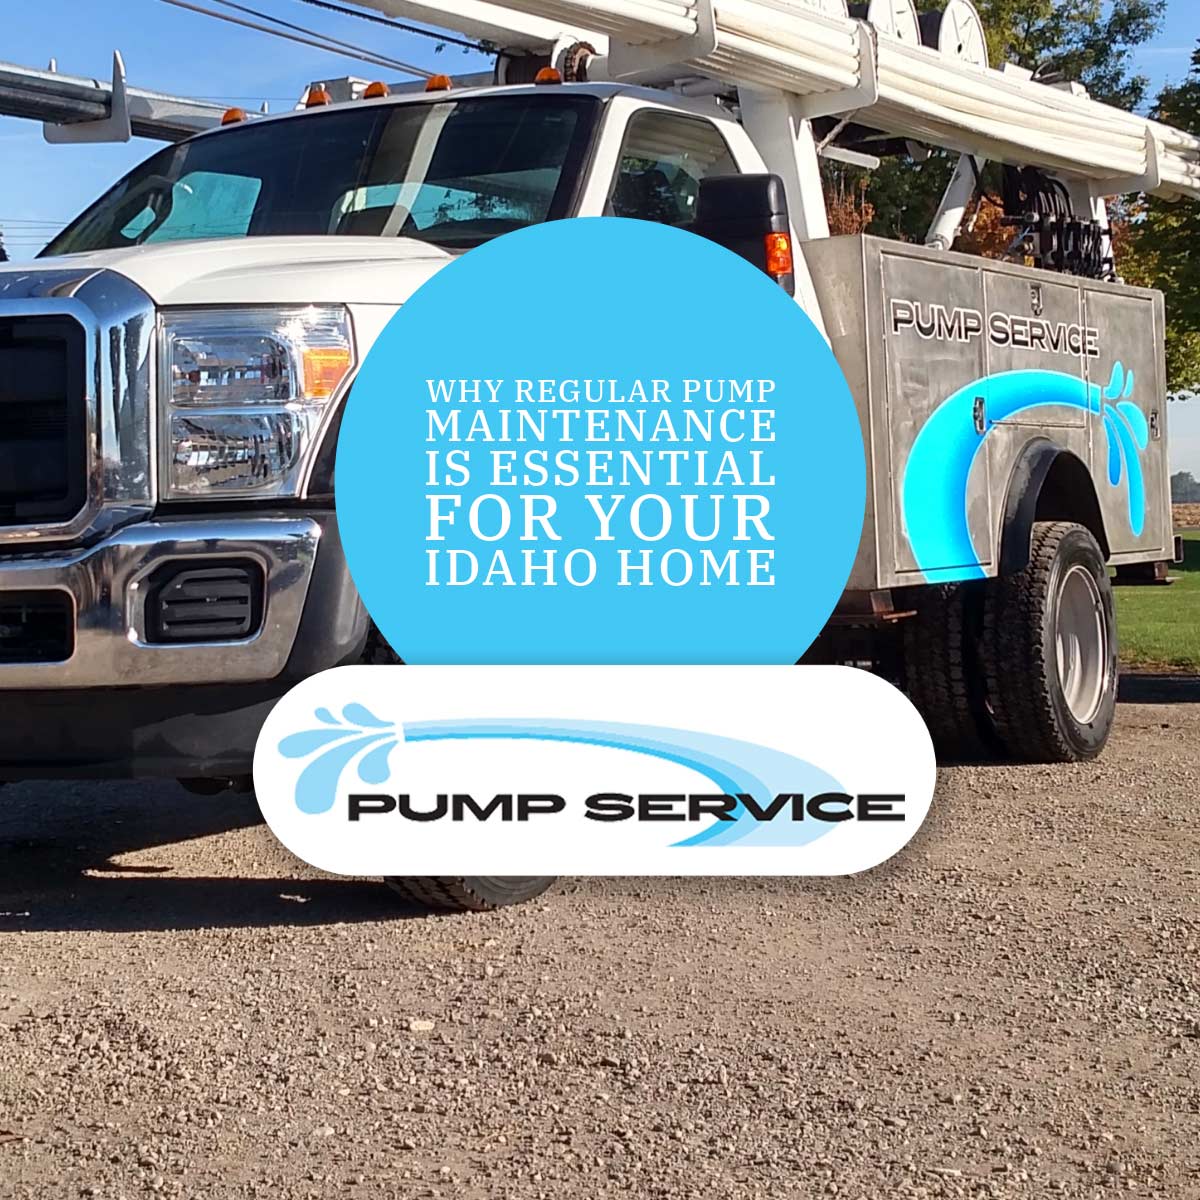 Why Regular Pump Maintenance is Essential for Your Idaho Home